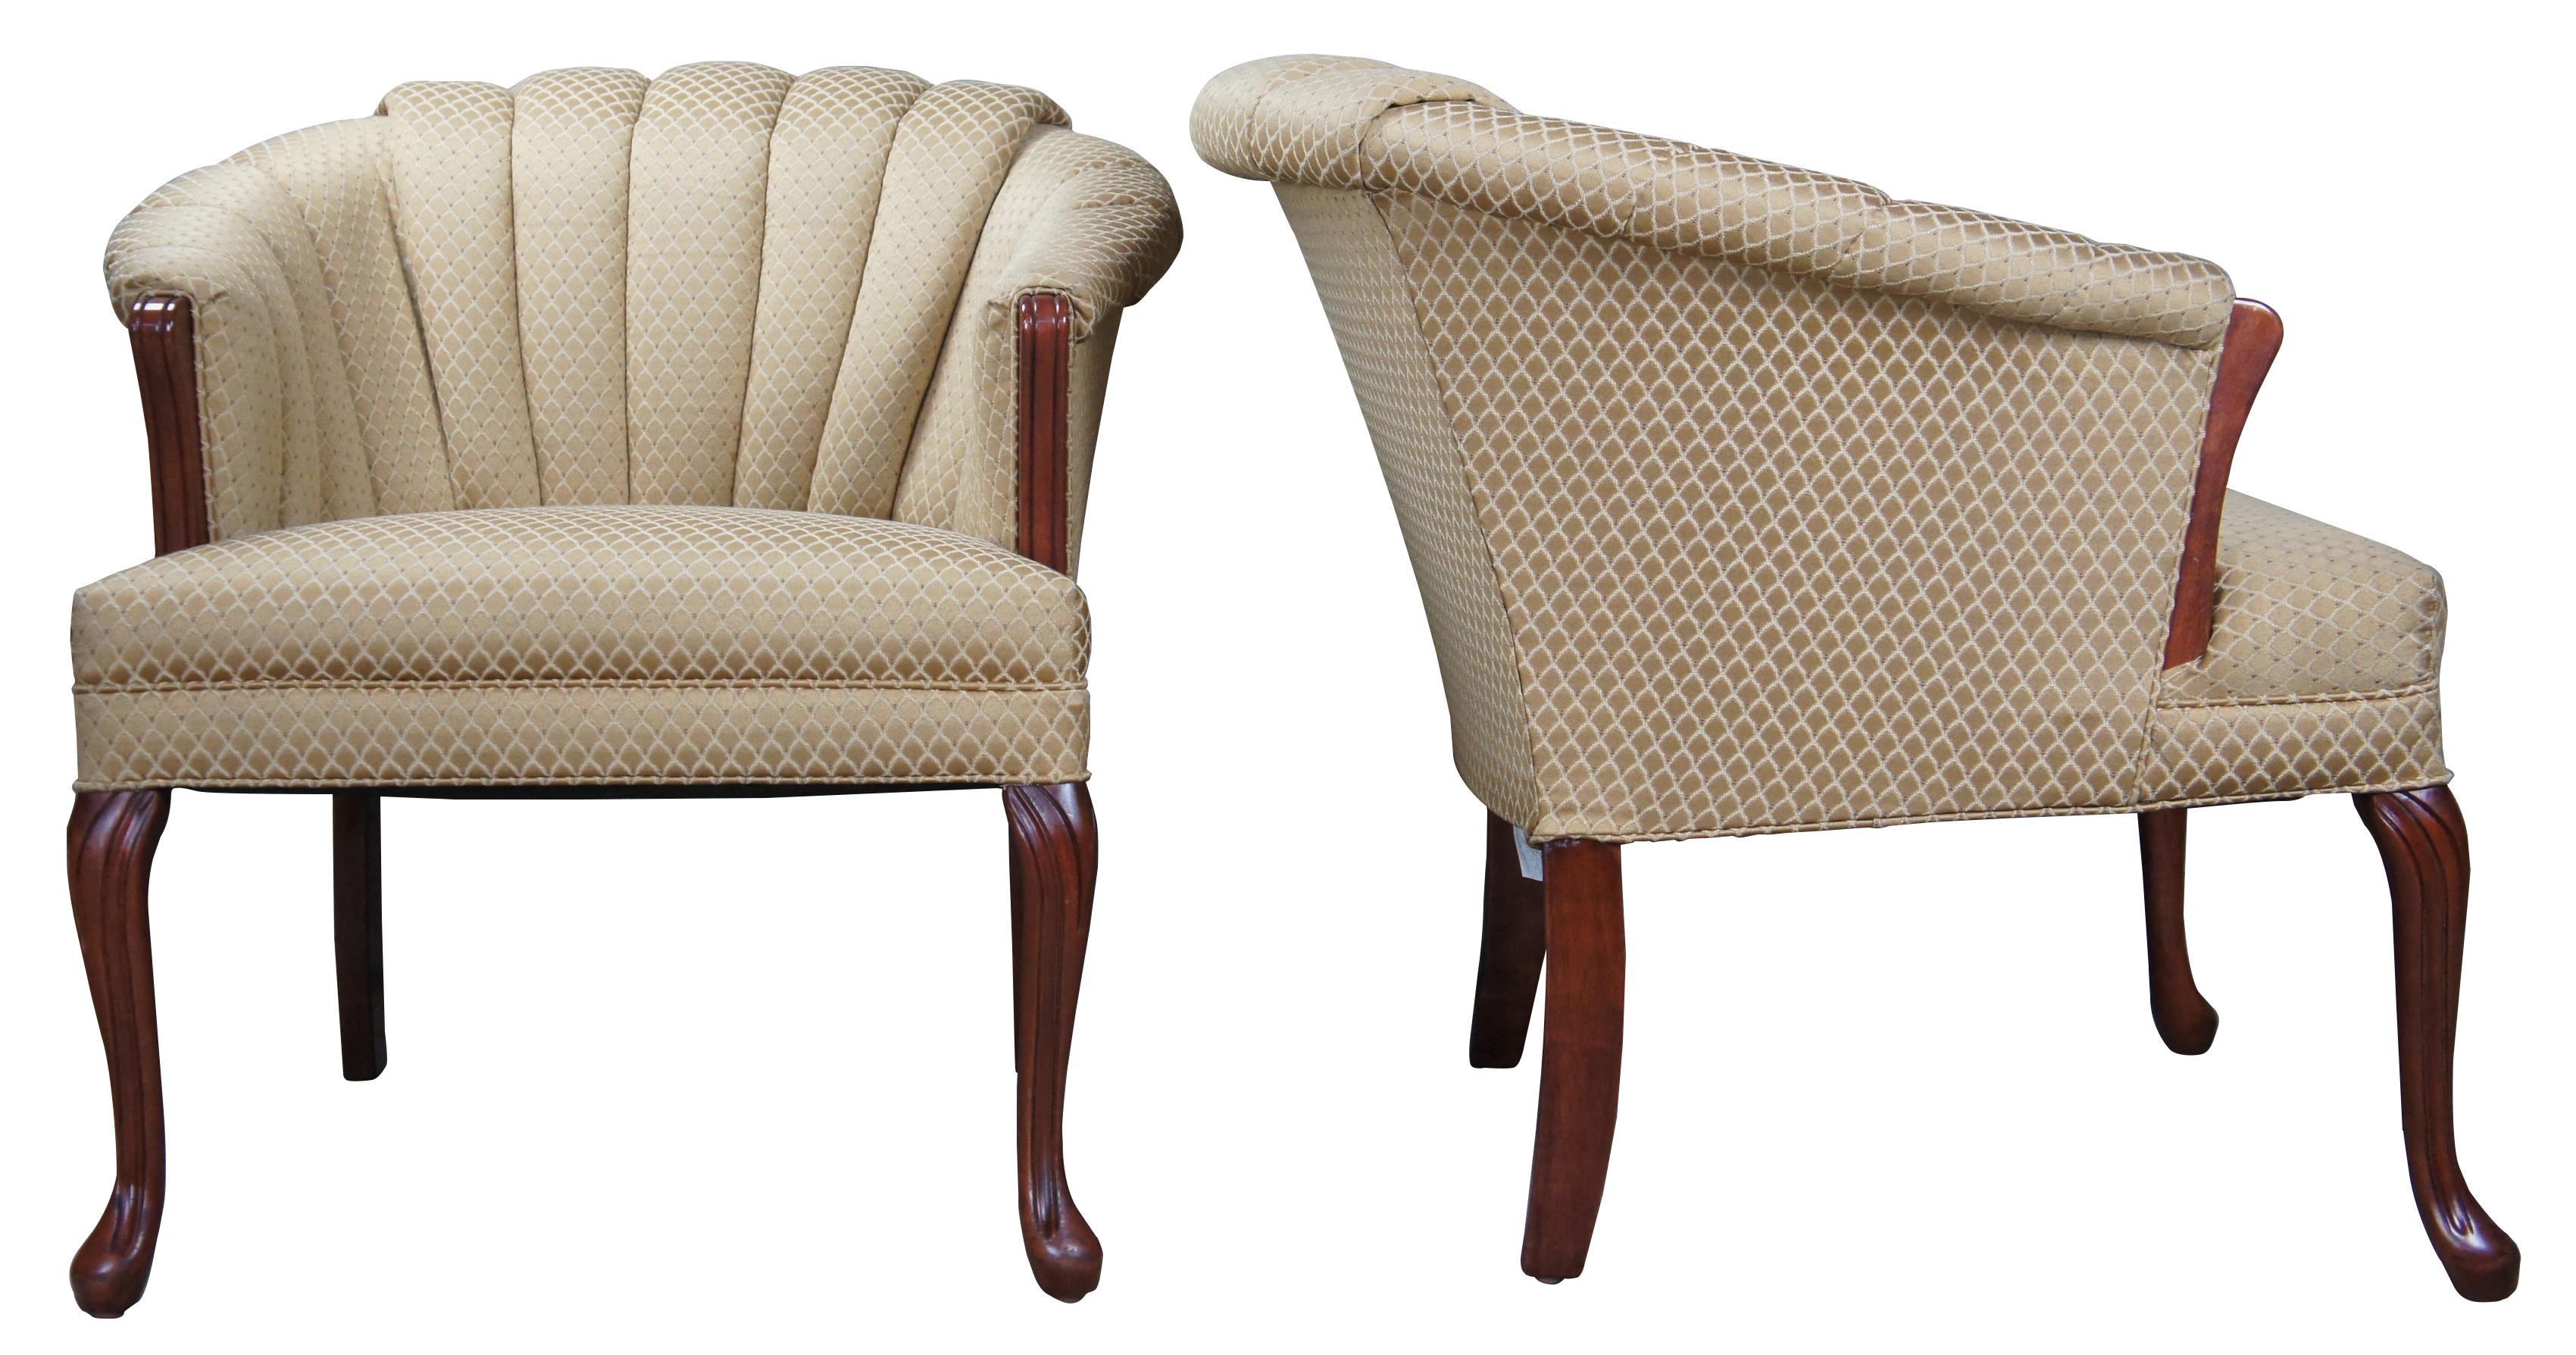 The Queen Anne accent chair by Best Chairs Inc. #0290DC. Features Art Deco styling with channel back upholstered in gold. Each chair features exposed wood frame made from cherry with Queen Anne legs.
  